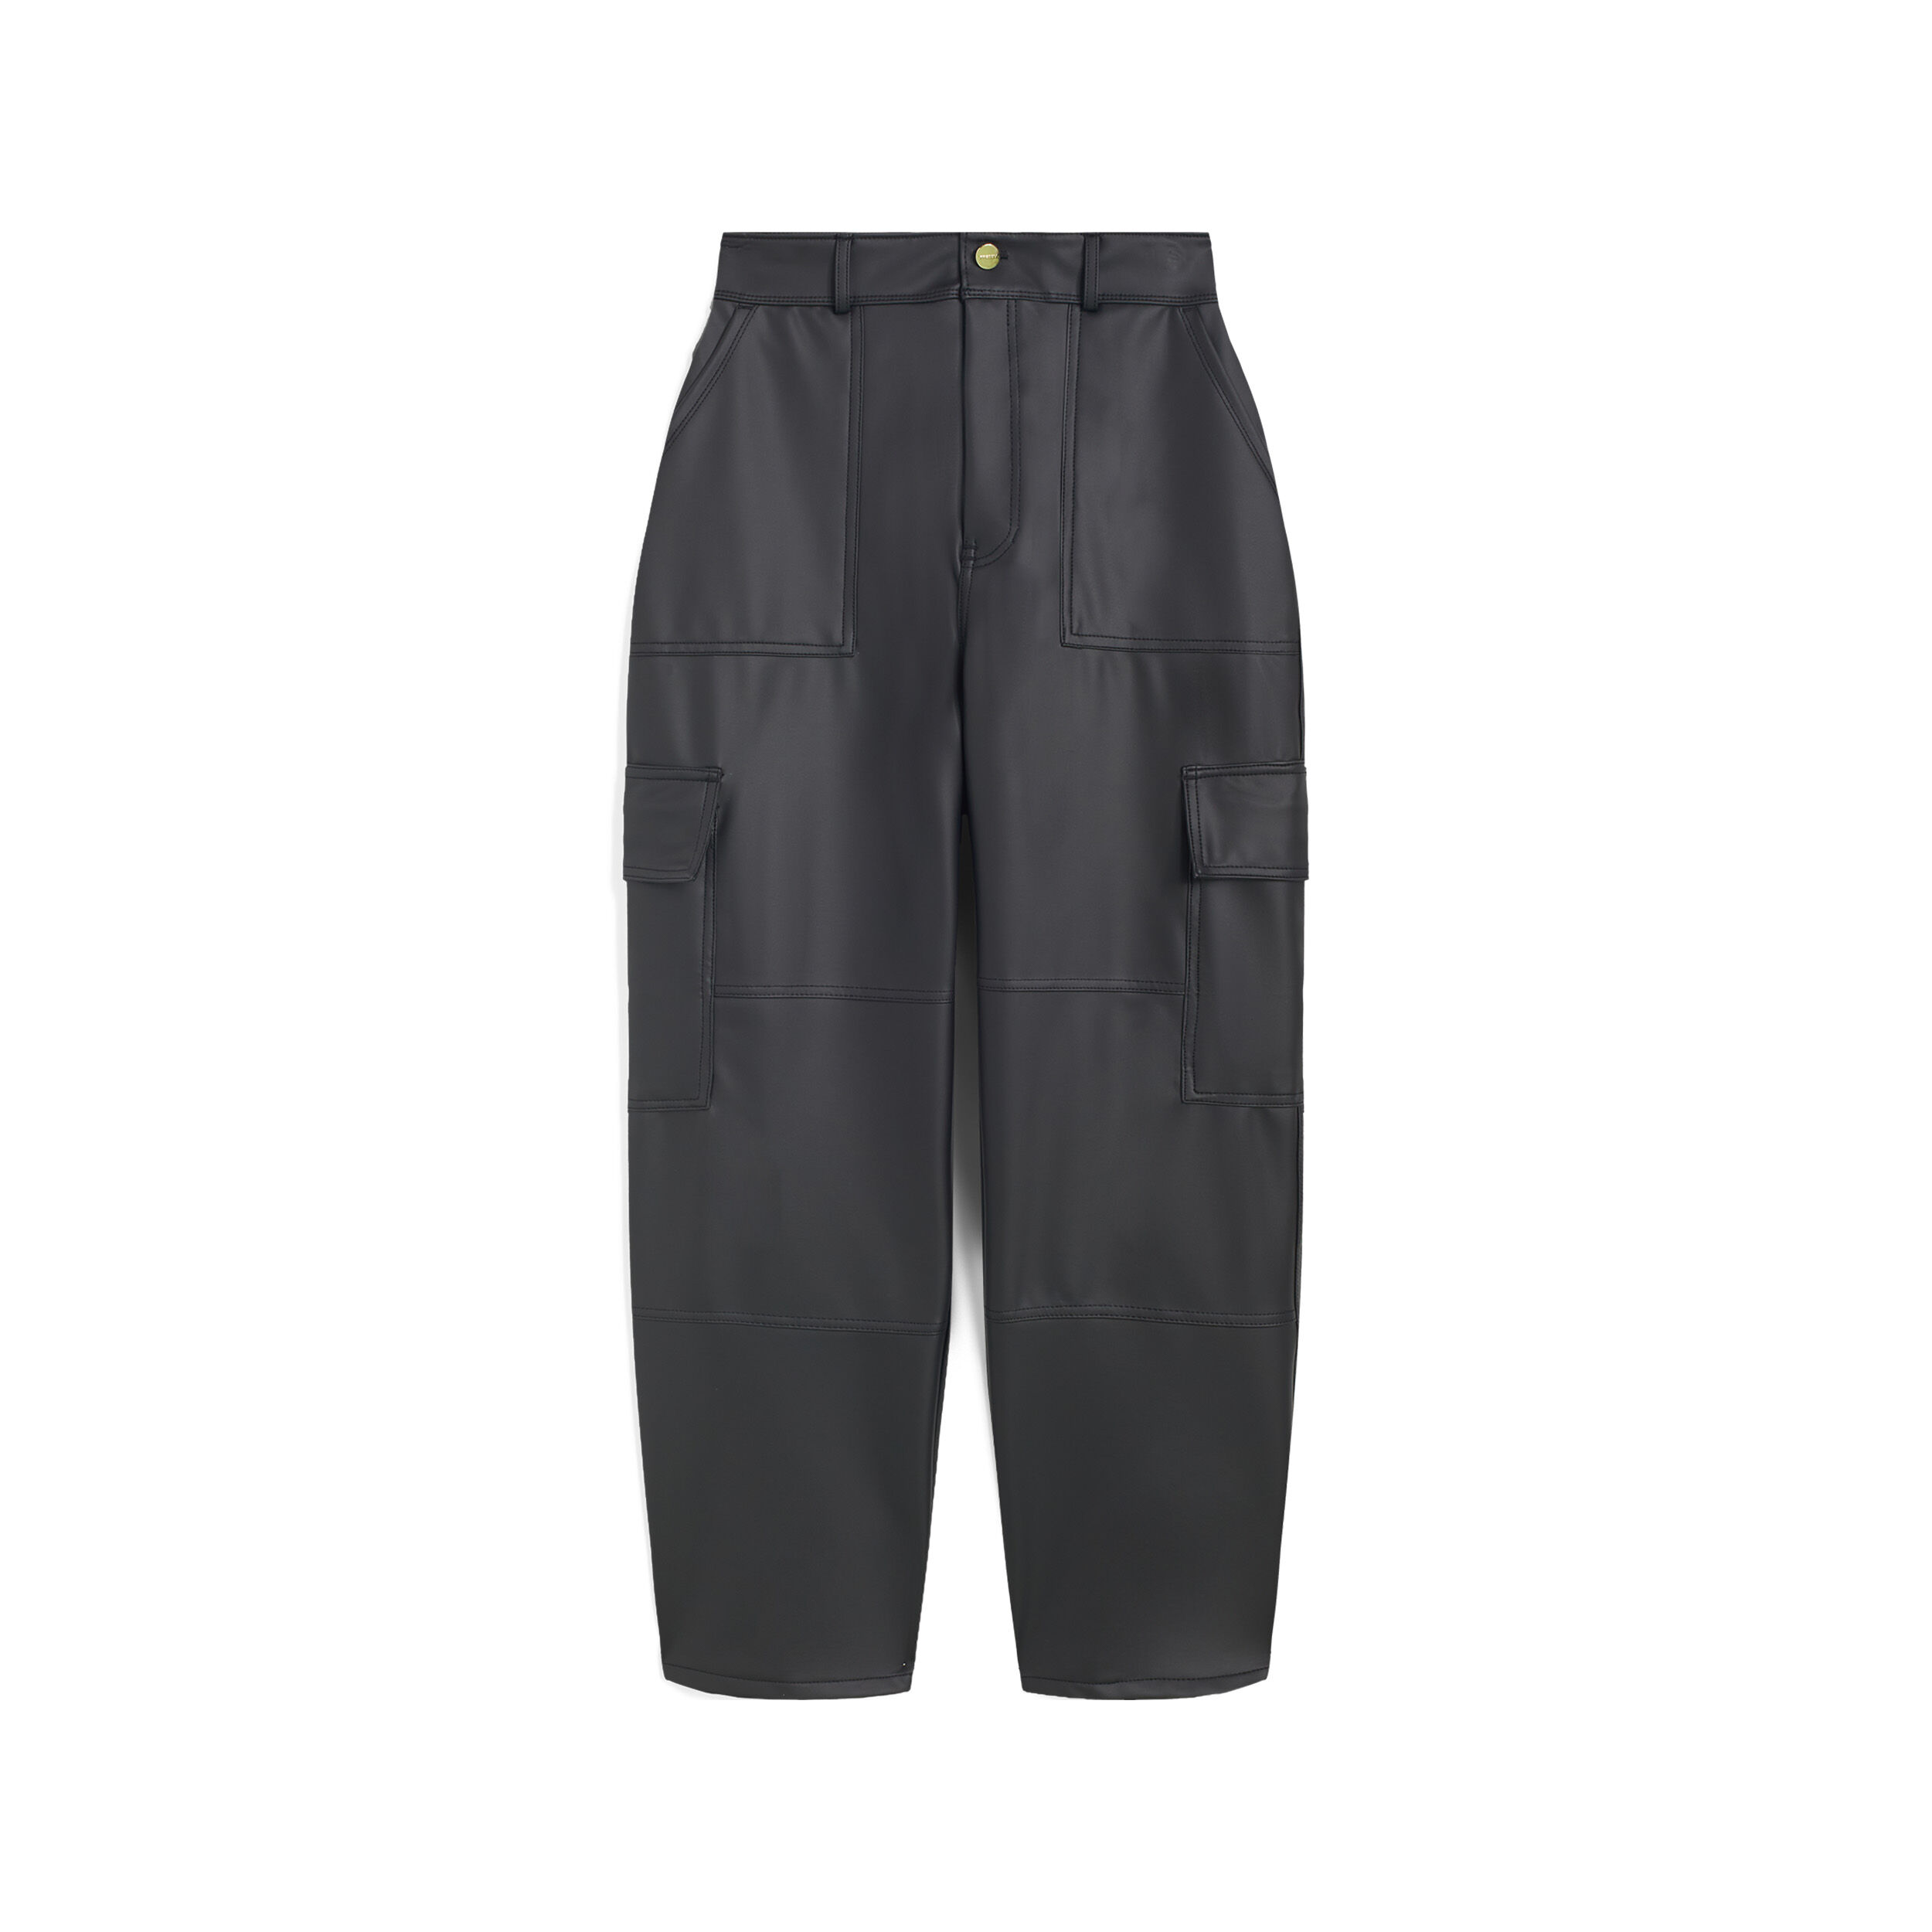 Freddy Pantaloni cargo in similpelle gamba straight cropped Nero Donna Small